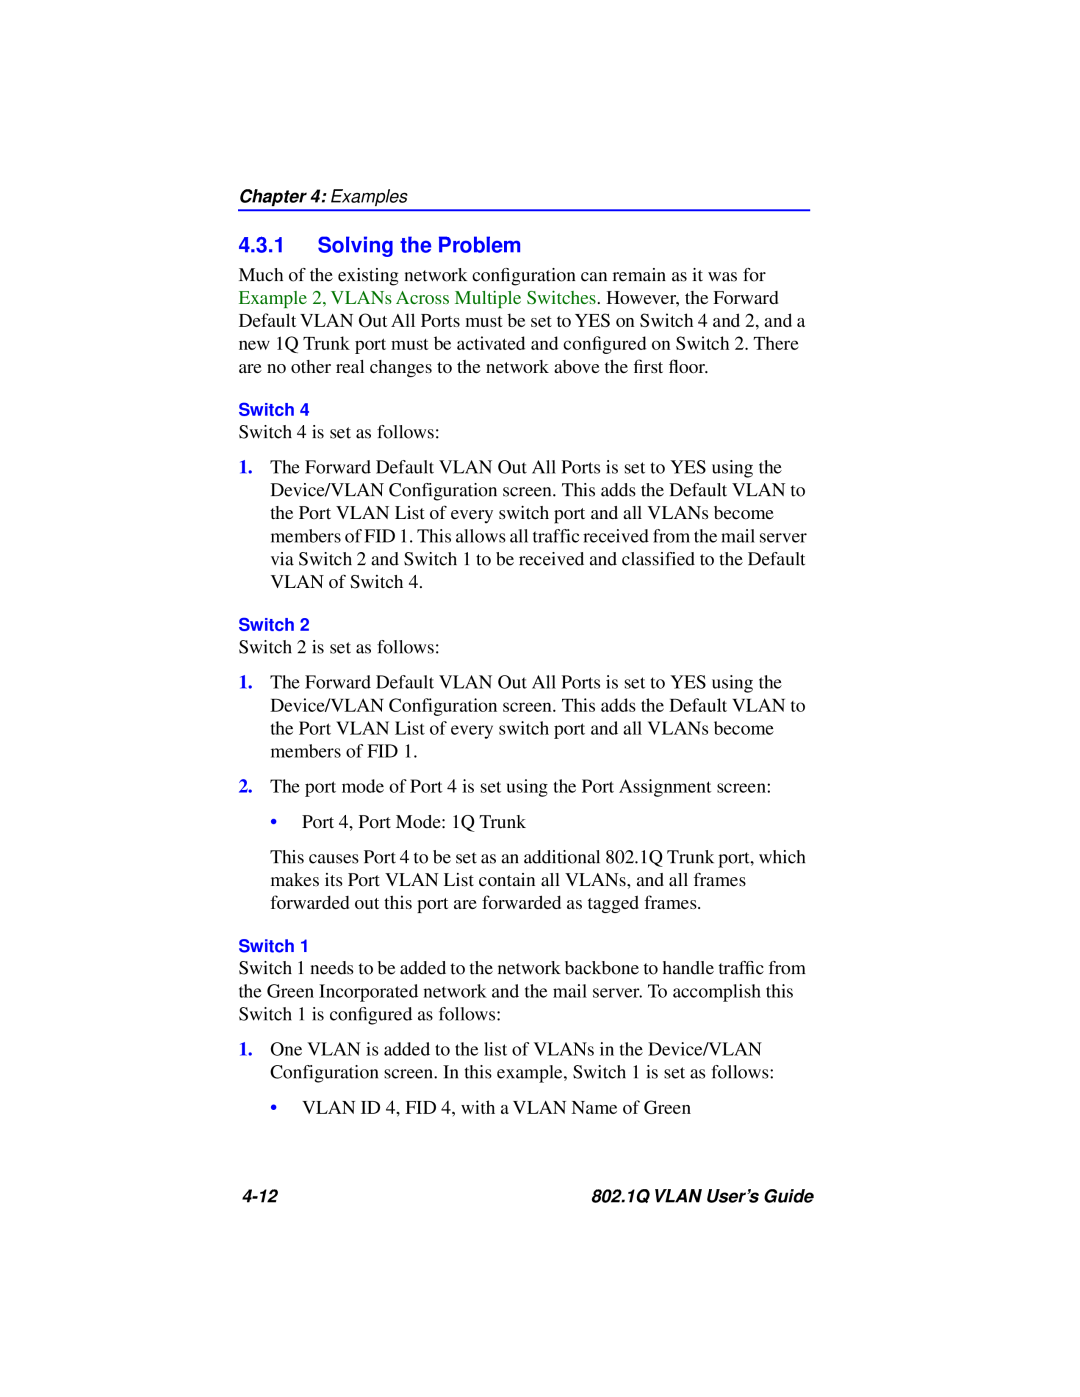 Cabletron Systems 802.1Q manual Solving the Problem 